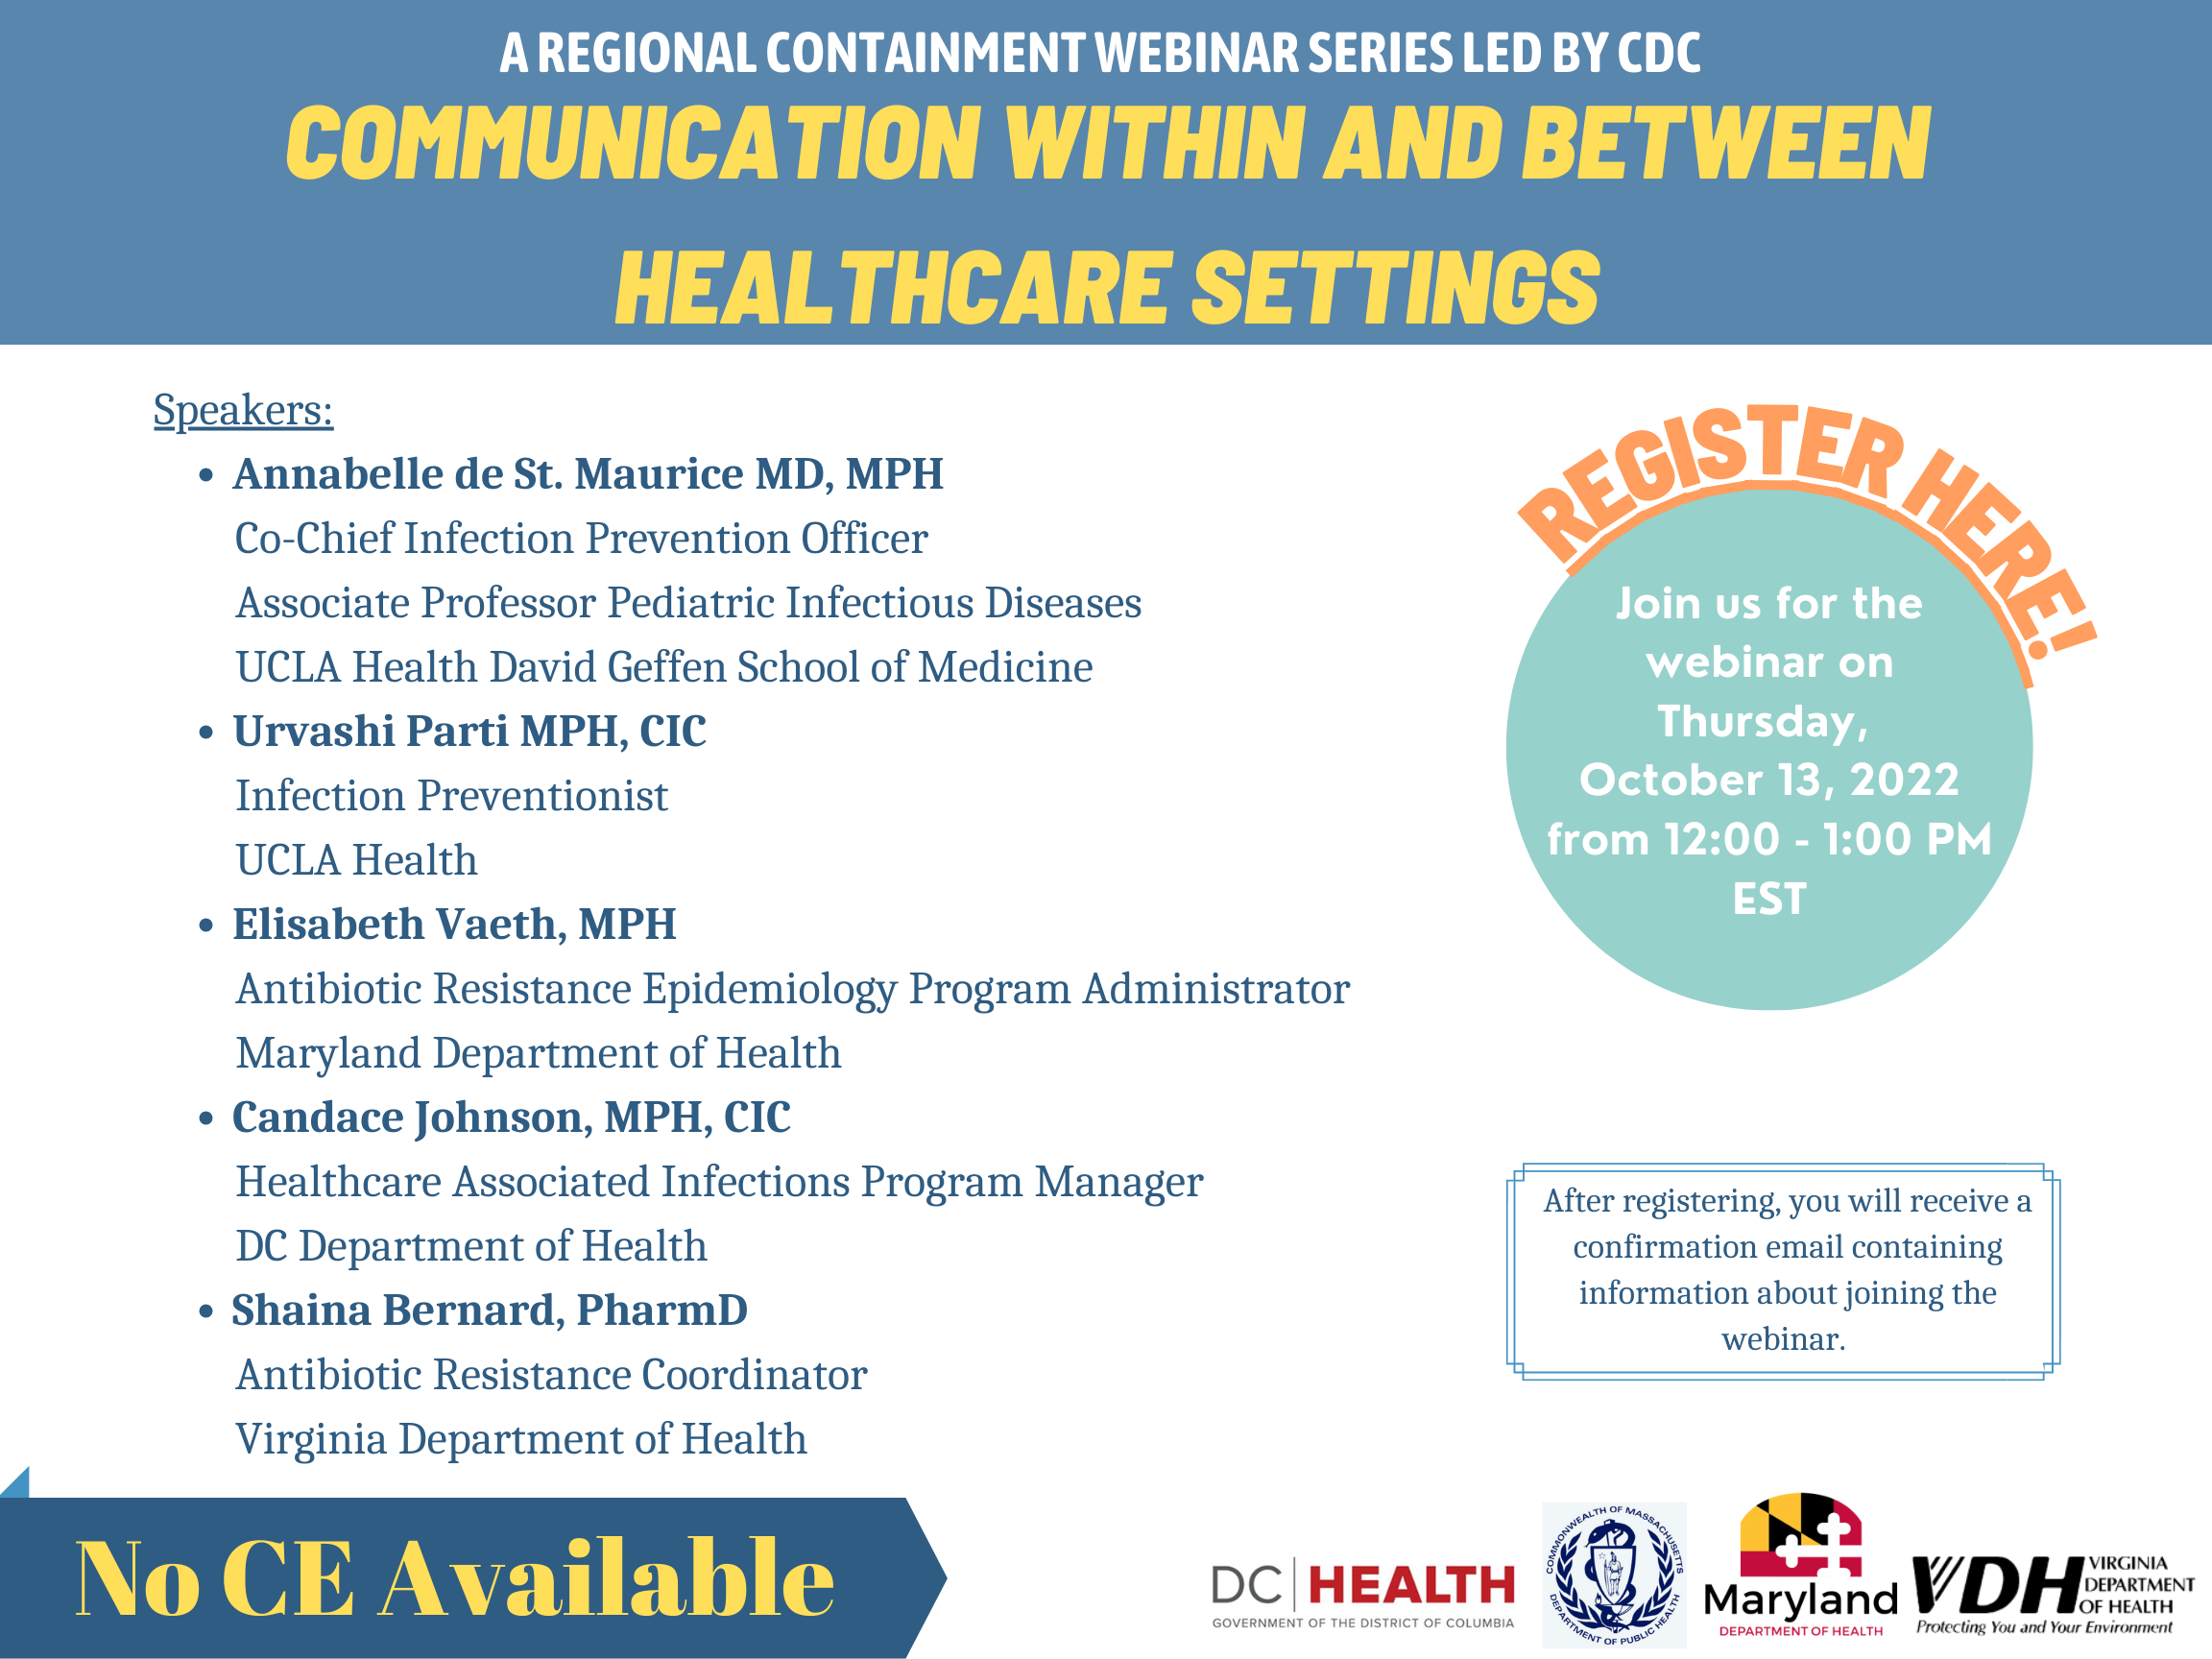 Communication within and between healthcare settings webinar brought to you by A regional containment webinar series led by CDC, on thursday October 13, 2022 from noon to 1 PM